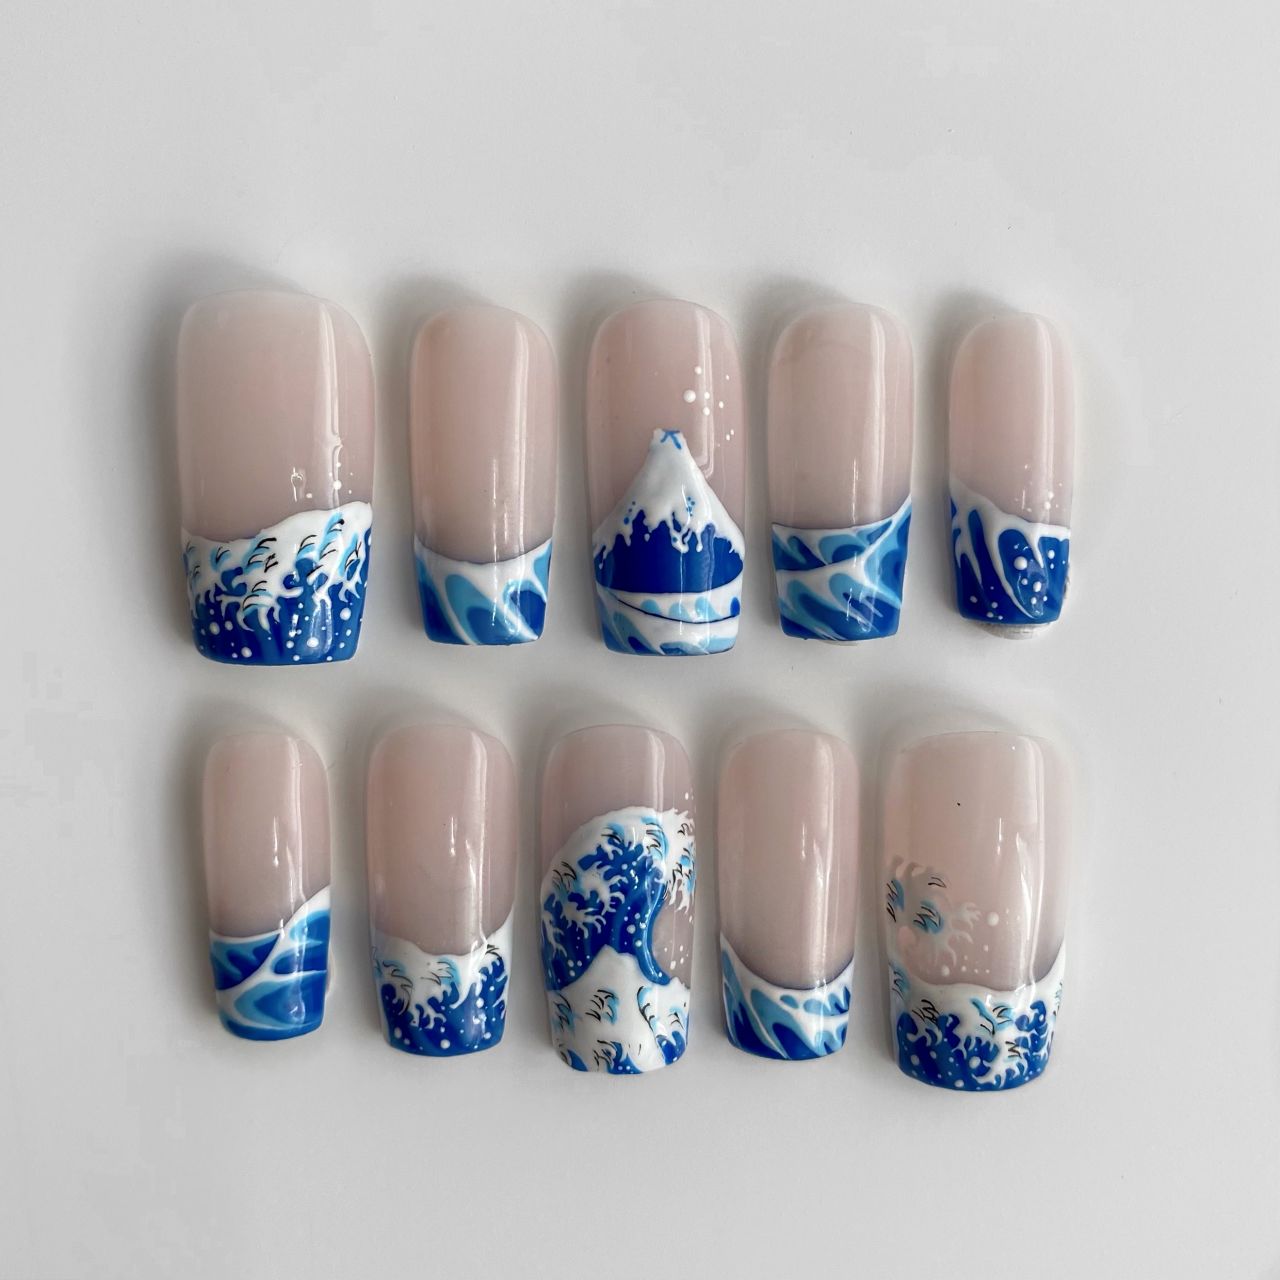 A close up of the press-on gel nails Emily Gilmour made for Team GB's Dina Asher-Smith, inspired by Hokusai's "Great Wave off Kanegawa."